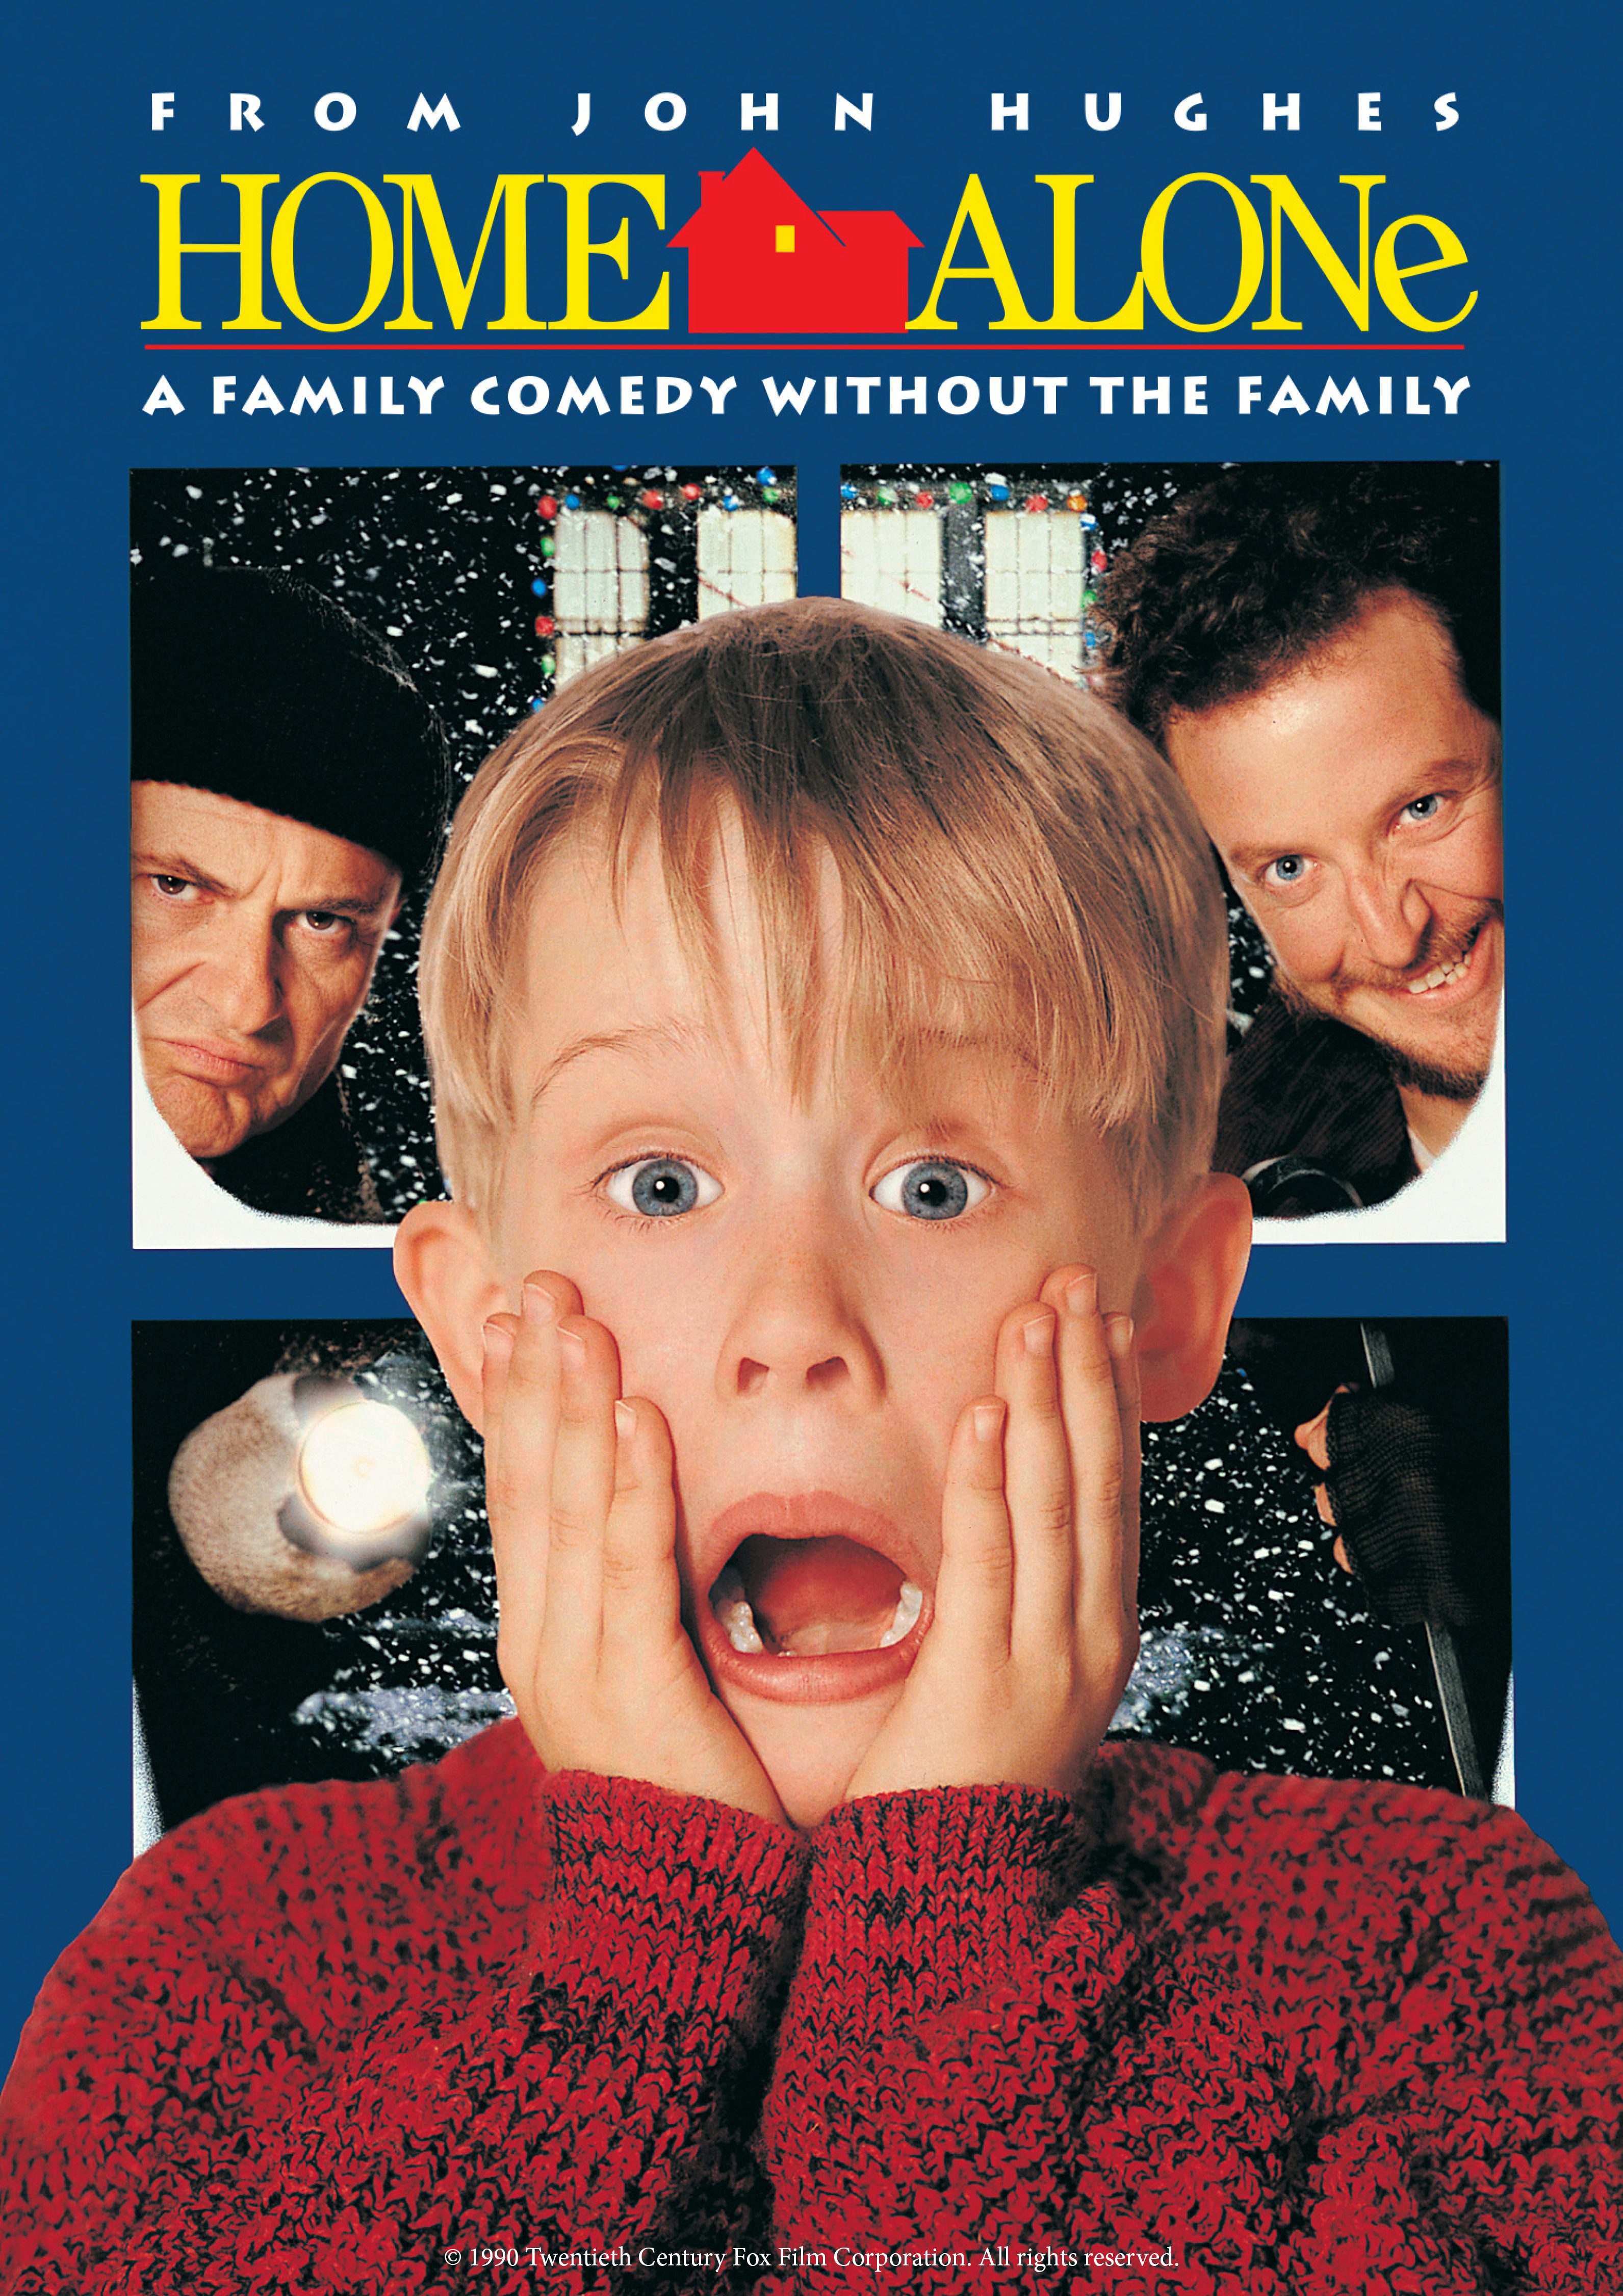 new home alone 4